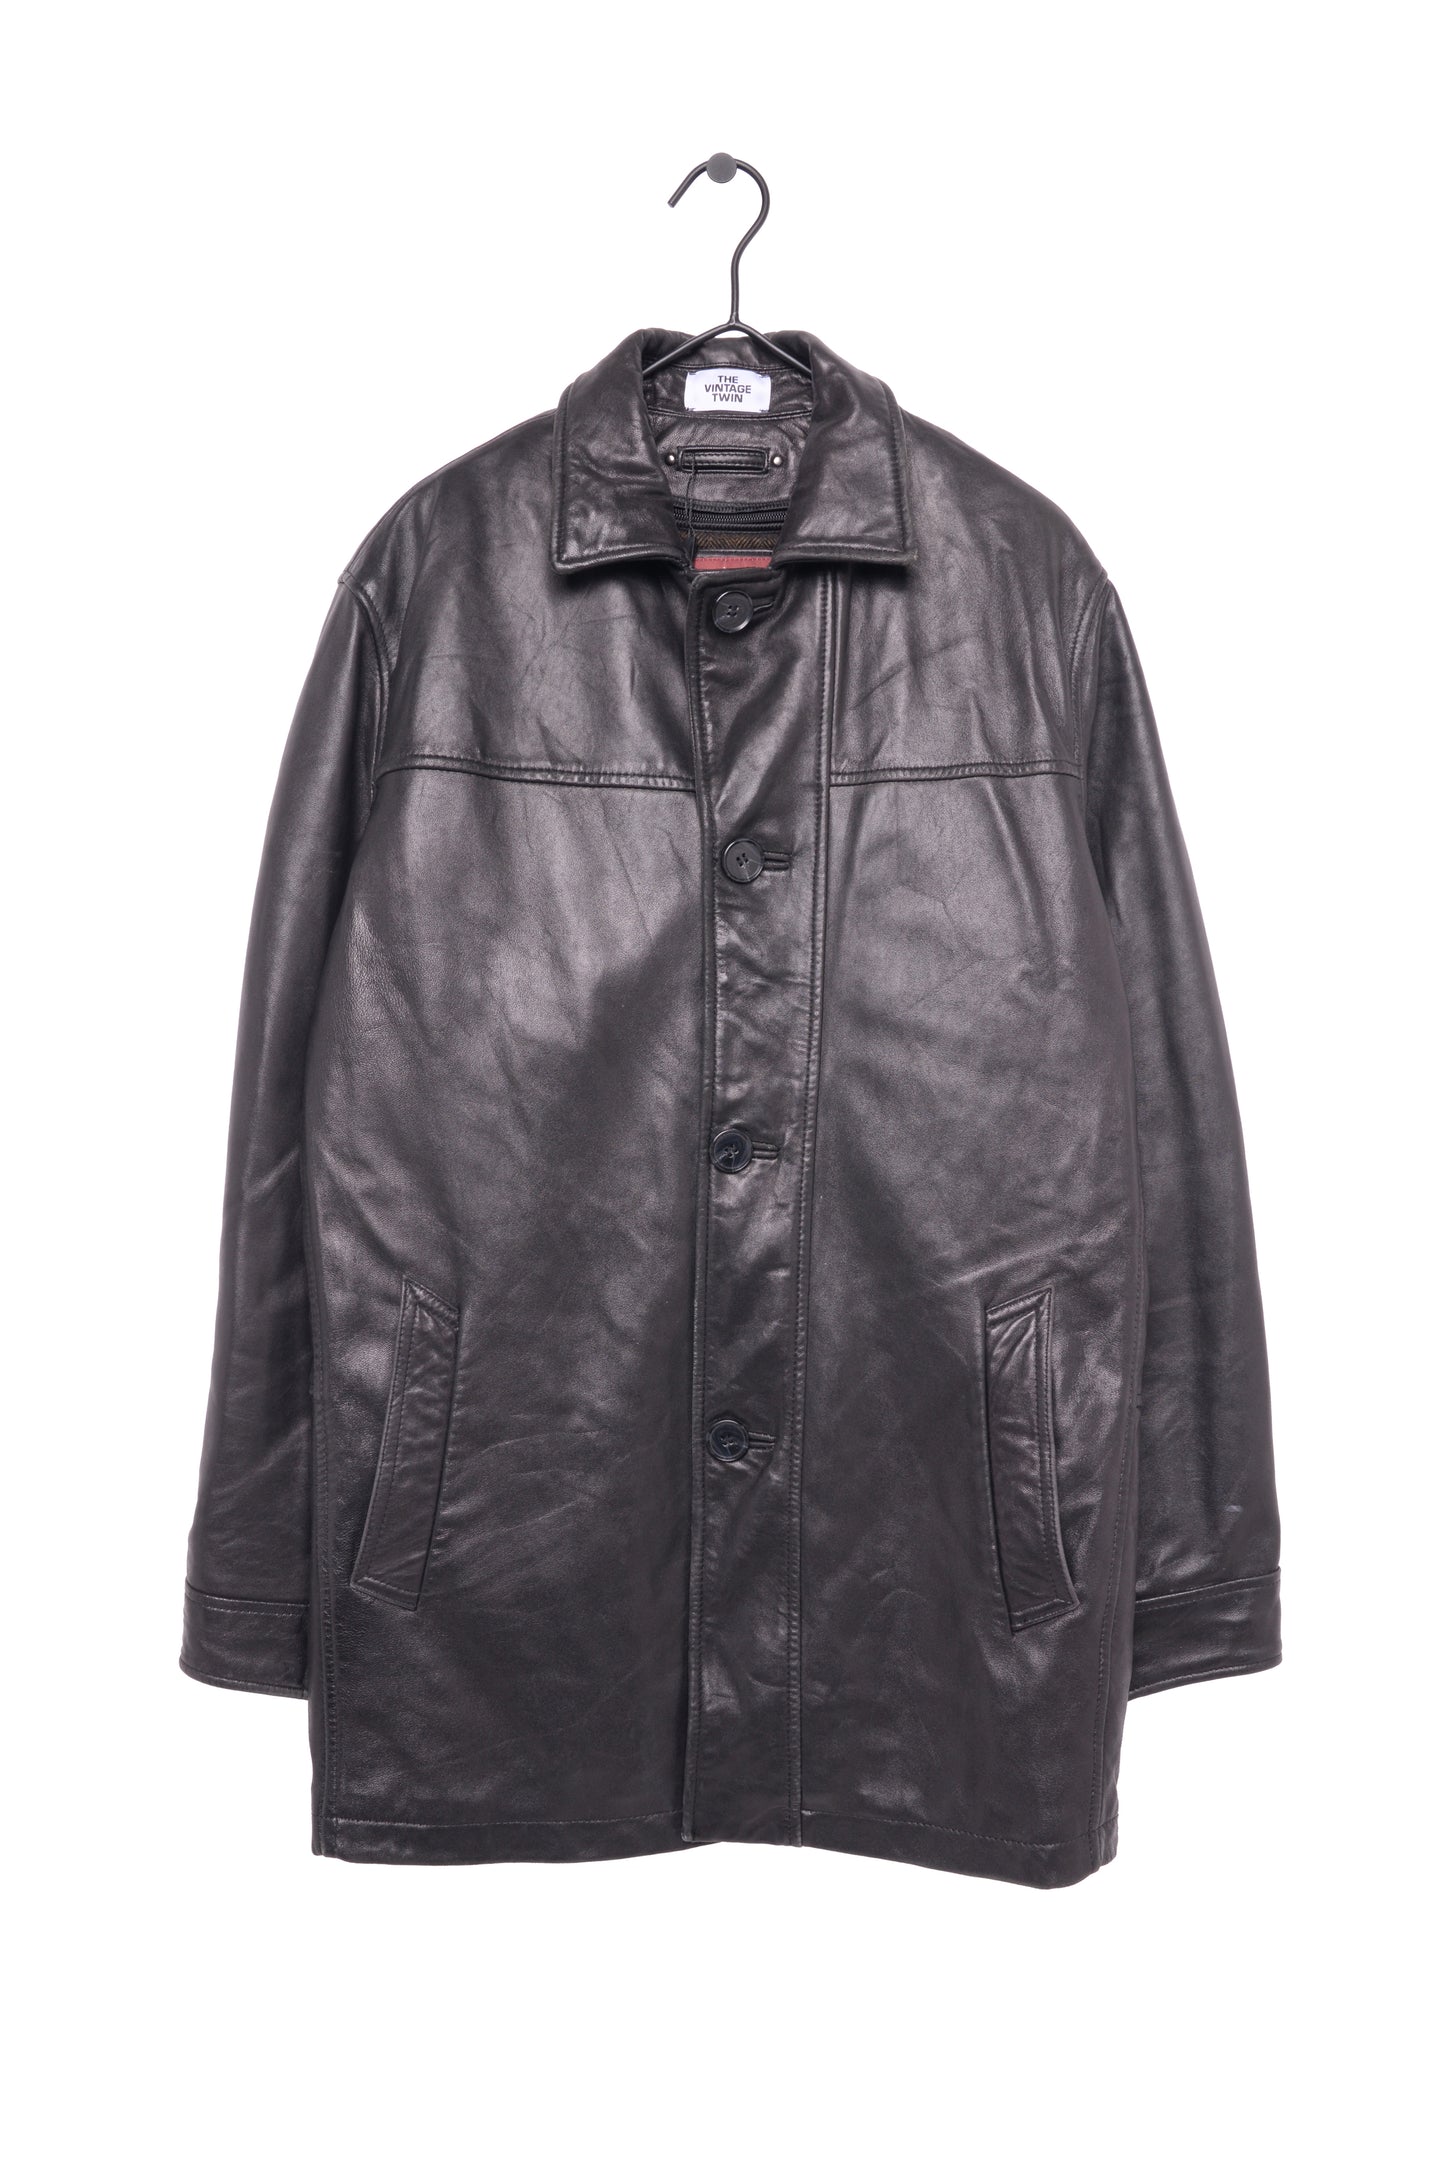 Lined Wilson's Leather Jacket